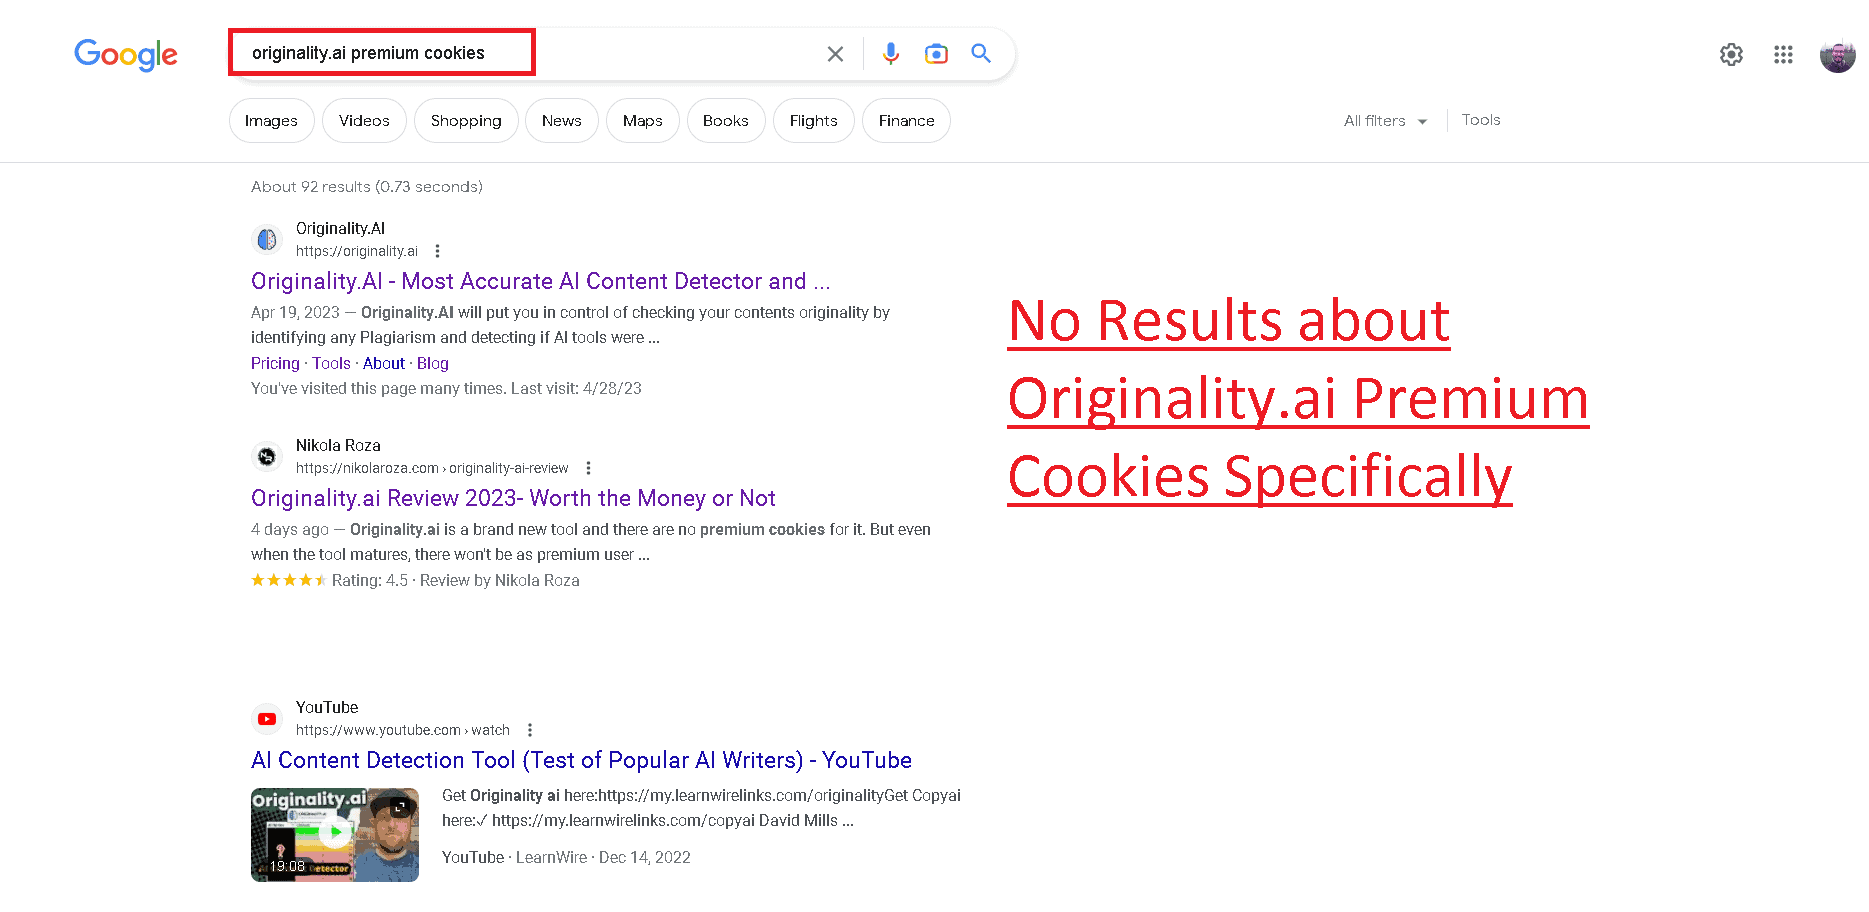 No Originality.ai premium cookies result for Google searched query